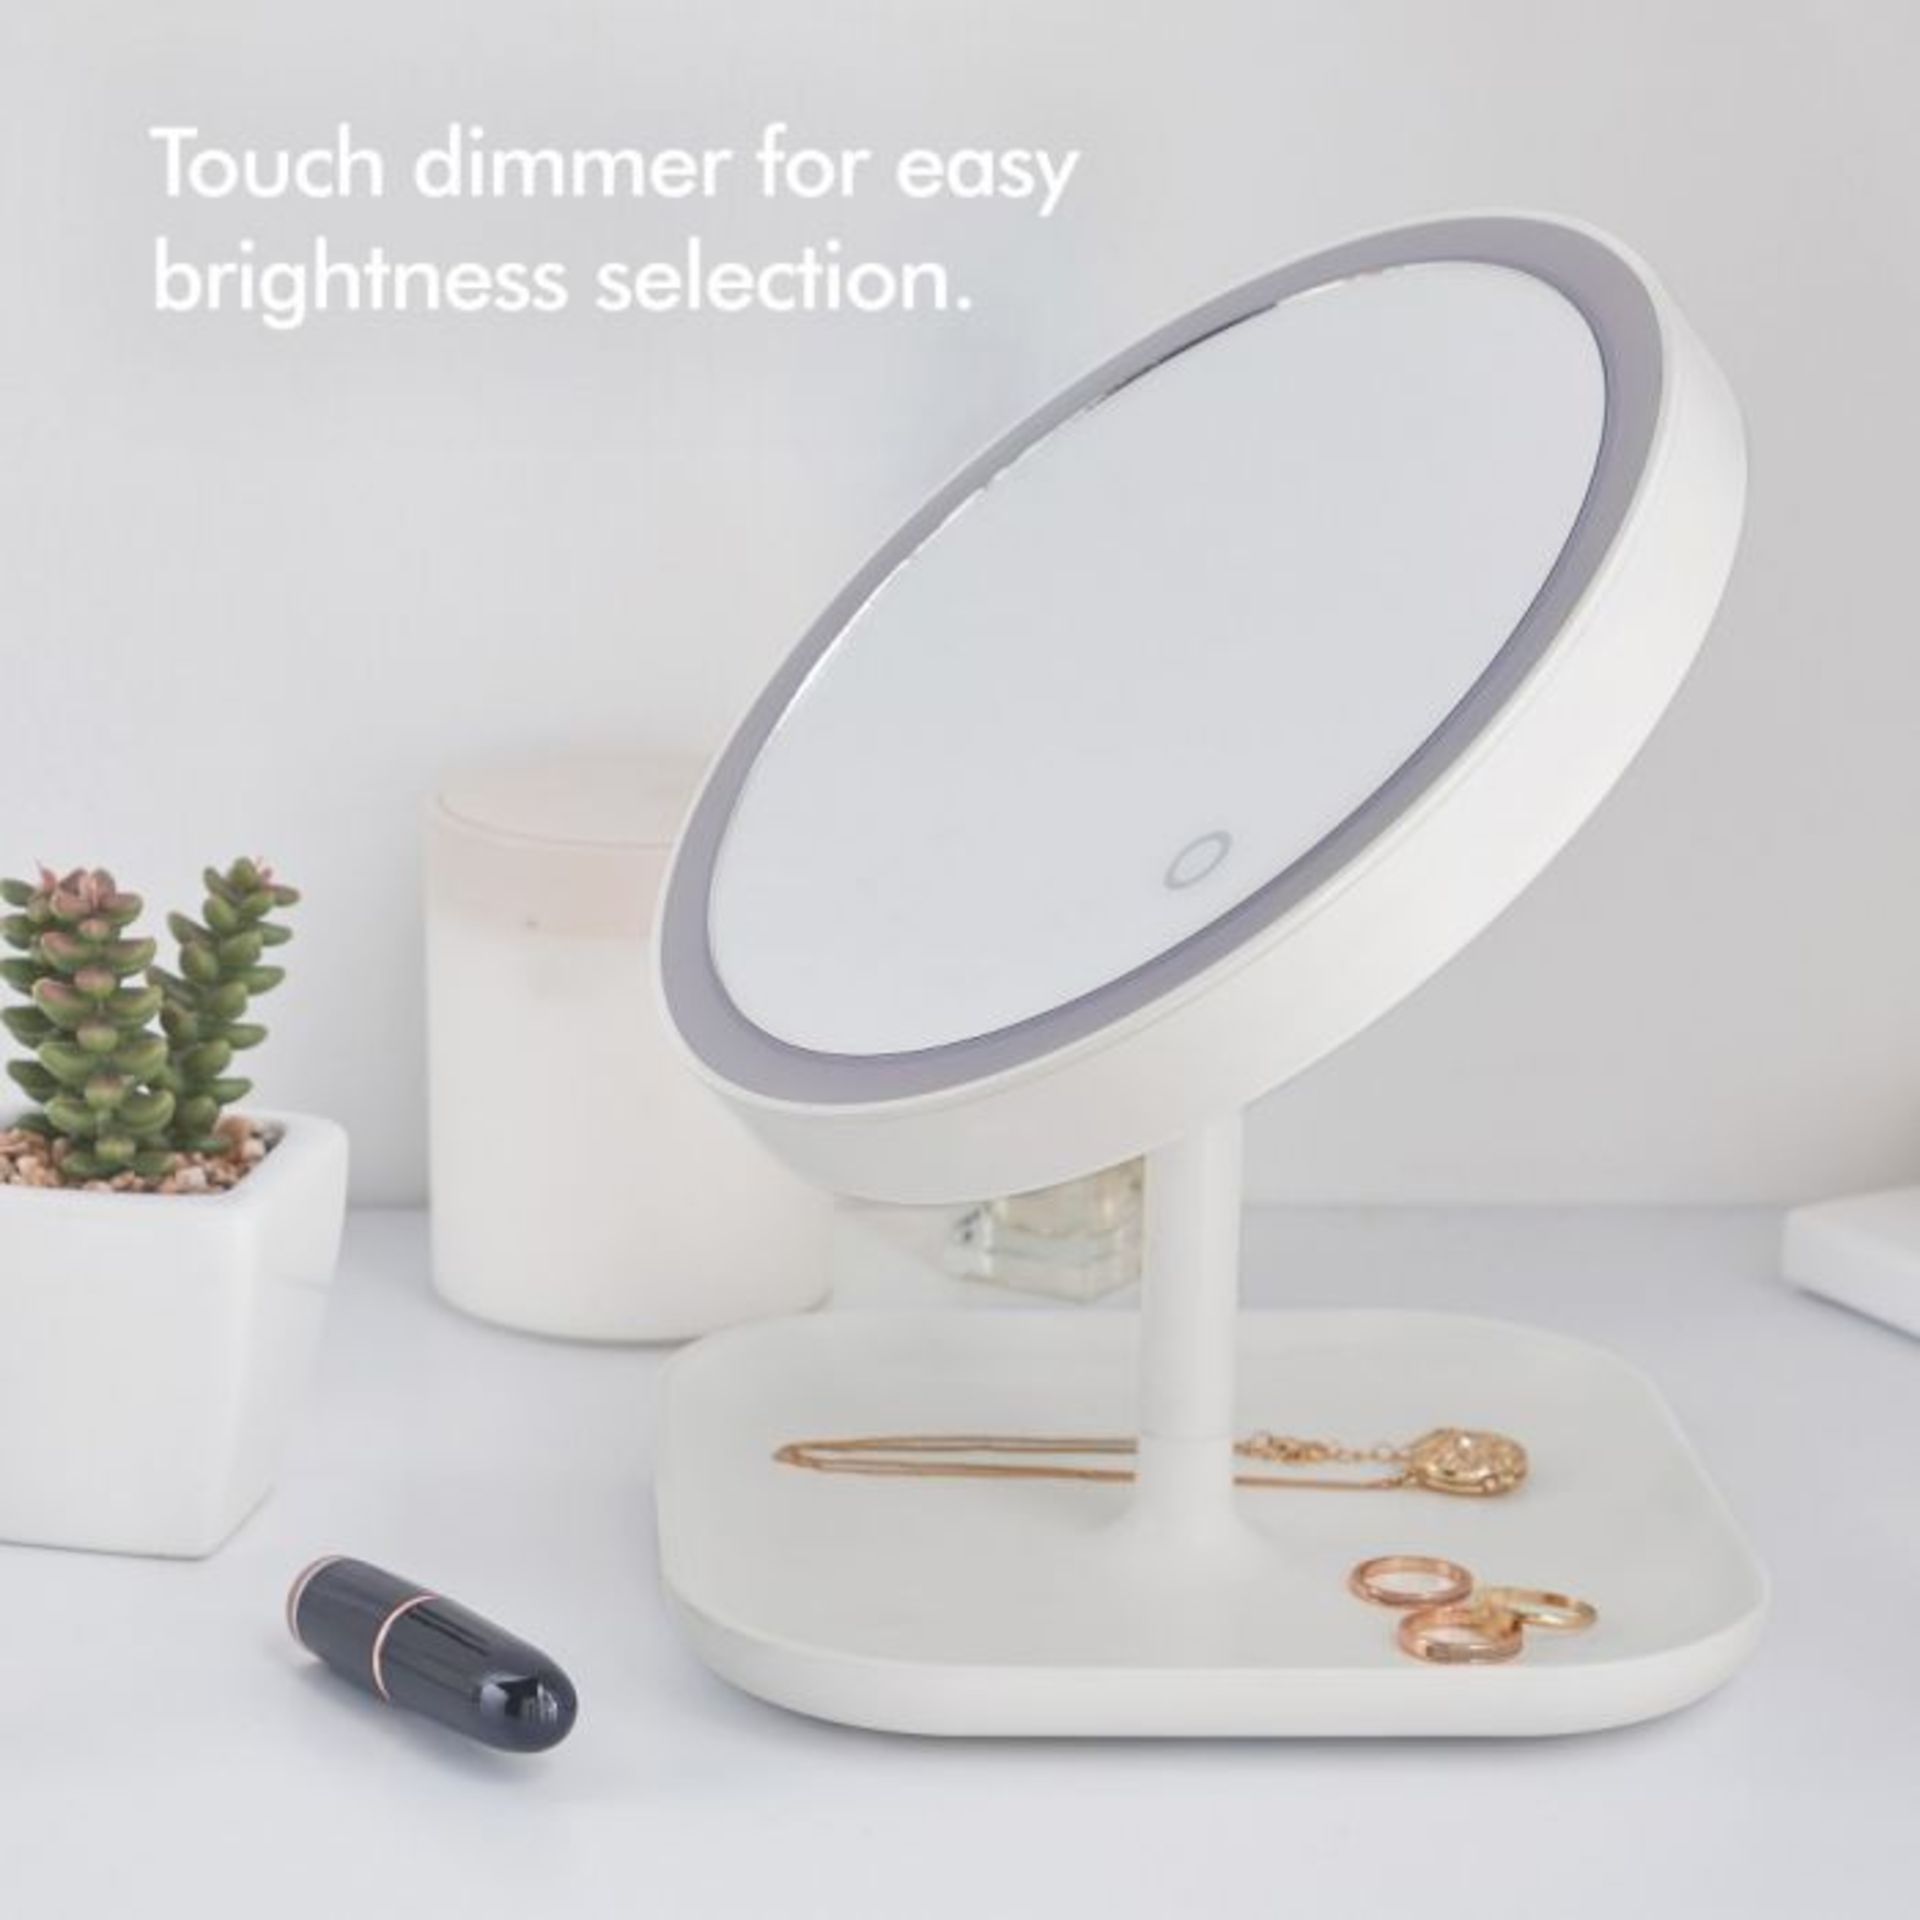 (V151) Illuminating Makeup Mirror Frosted ring light mirror with 23 LED strip lights. The 10x... - Image 2 of 3